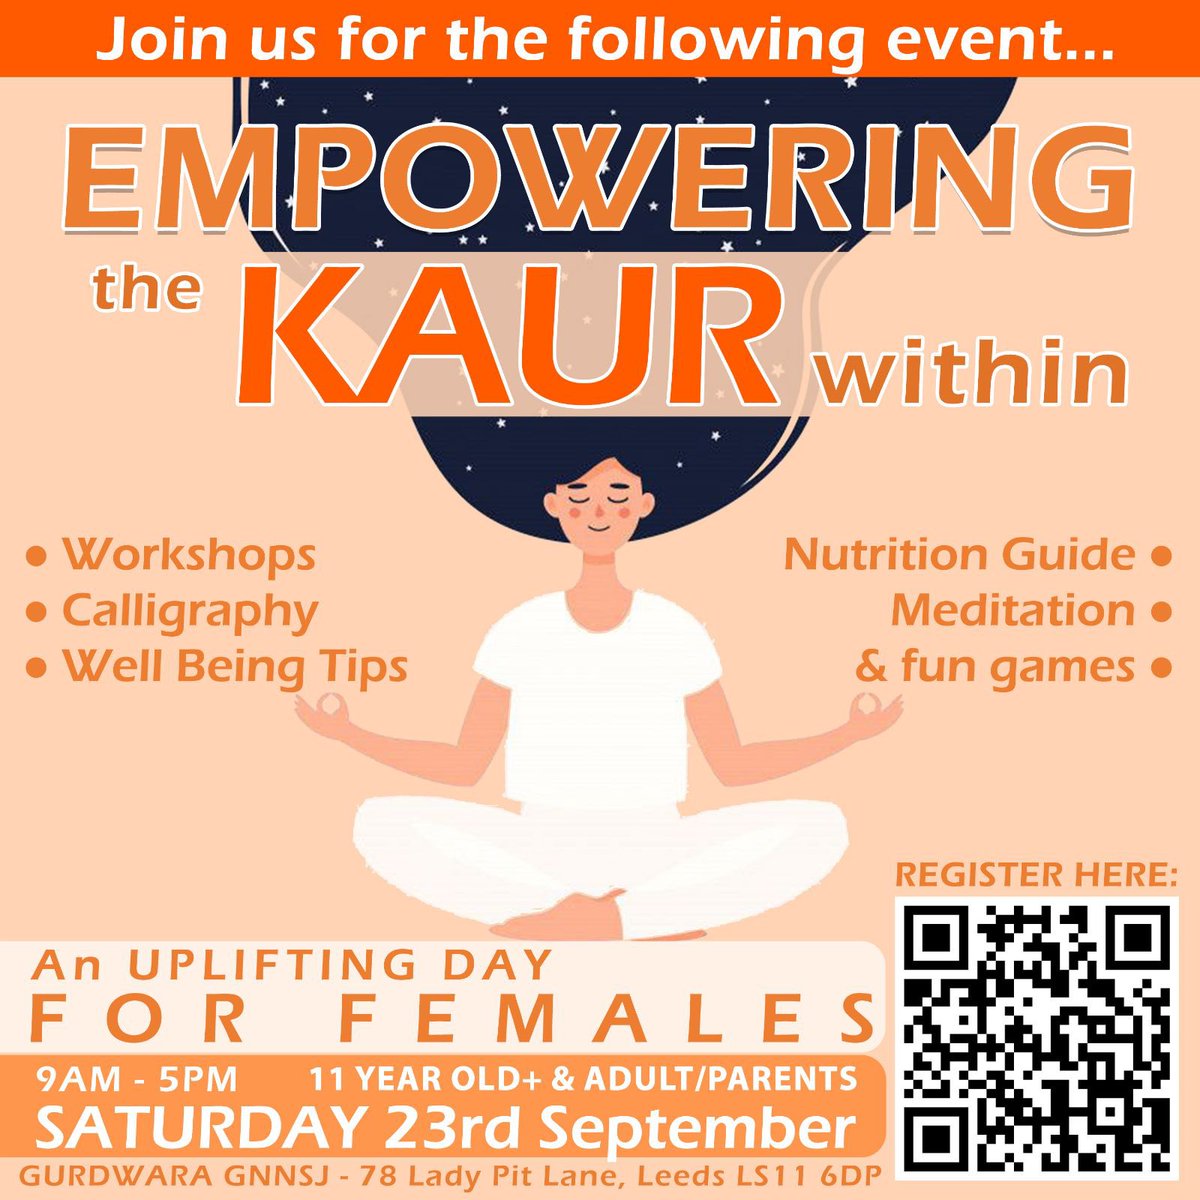 Unlock the power within you at the event for females – a day dedicated to uplifting women's positivity and nurturing holistic well-being. Join us for an unforgettable experience designed to rejuvenate your spirit, inspire your mind, and nourish your body. TheKaurWithin.eventbrite.co.uk